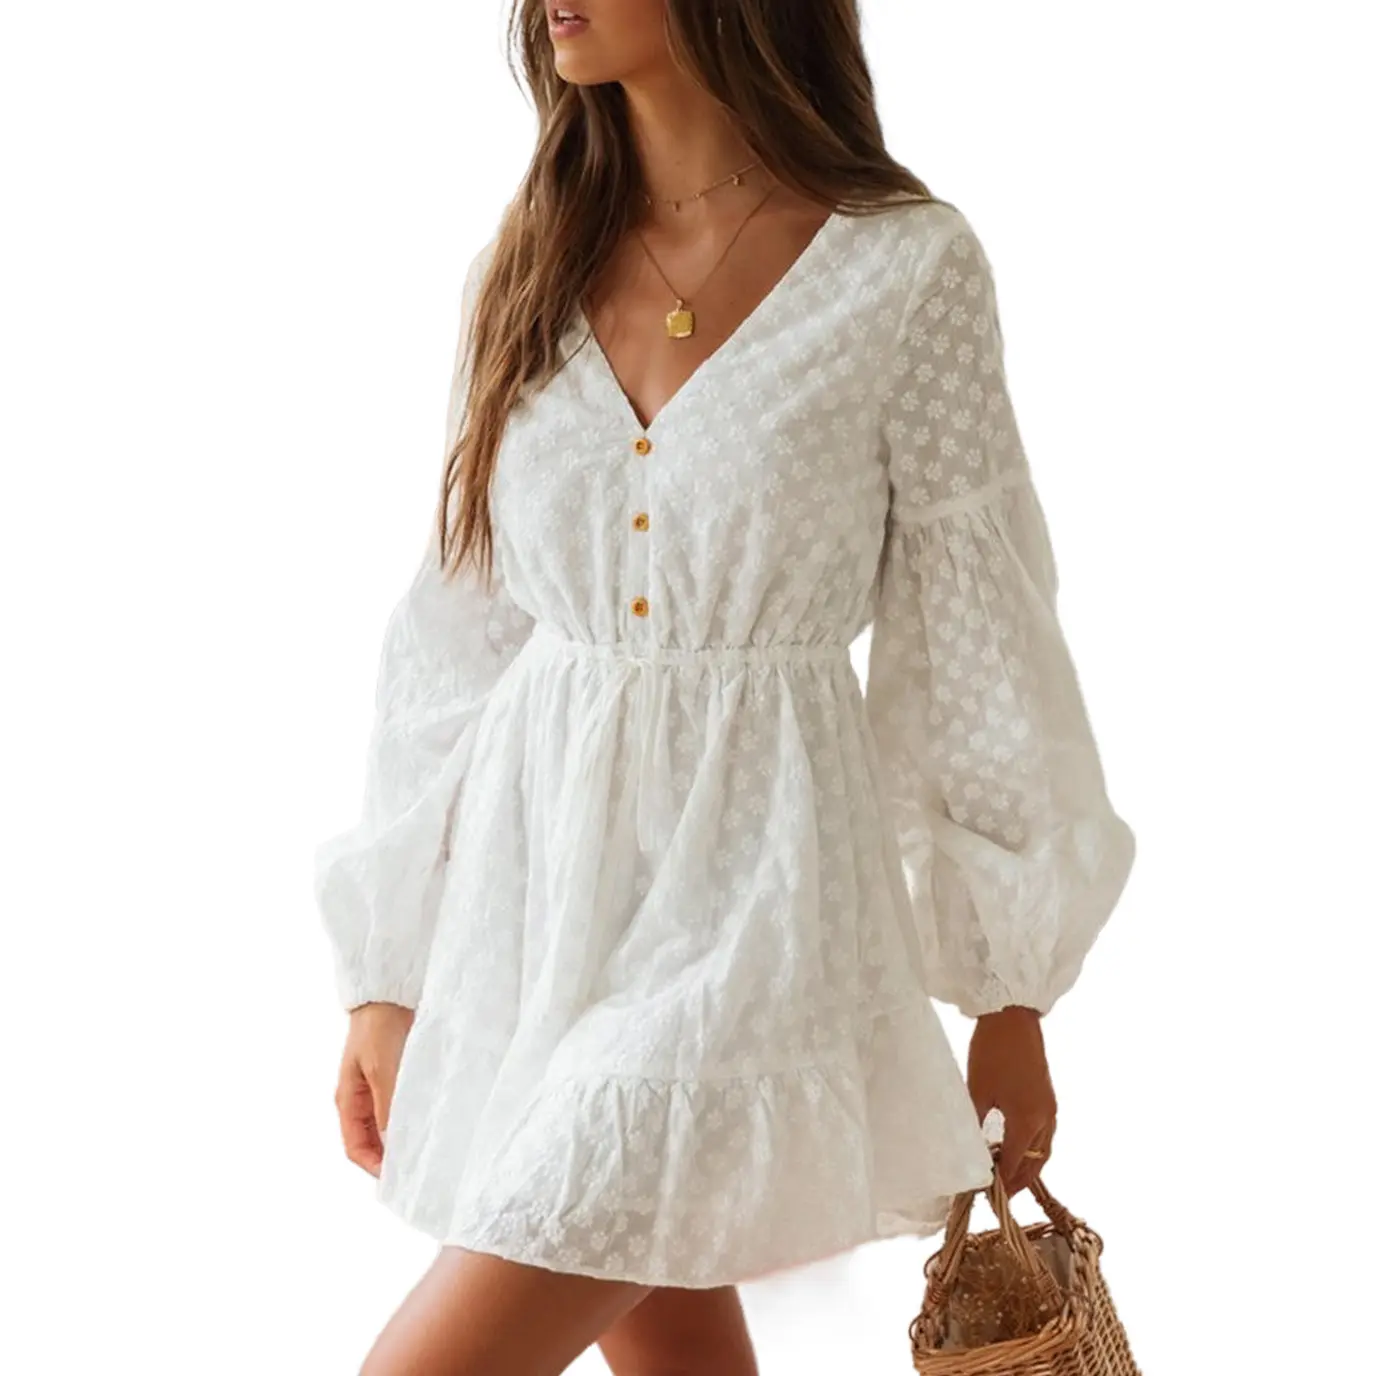 Custom Boho Inspired White Mini Casual Dress Embroidery Floral V Neck Bishop Puff Sleeve Cut Out Summer Boho Dress